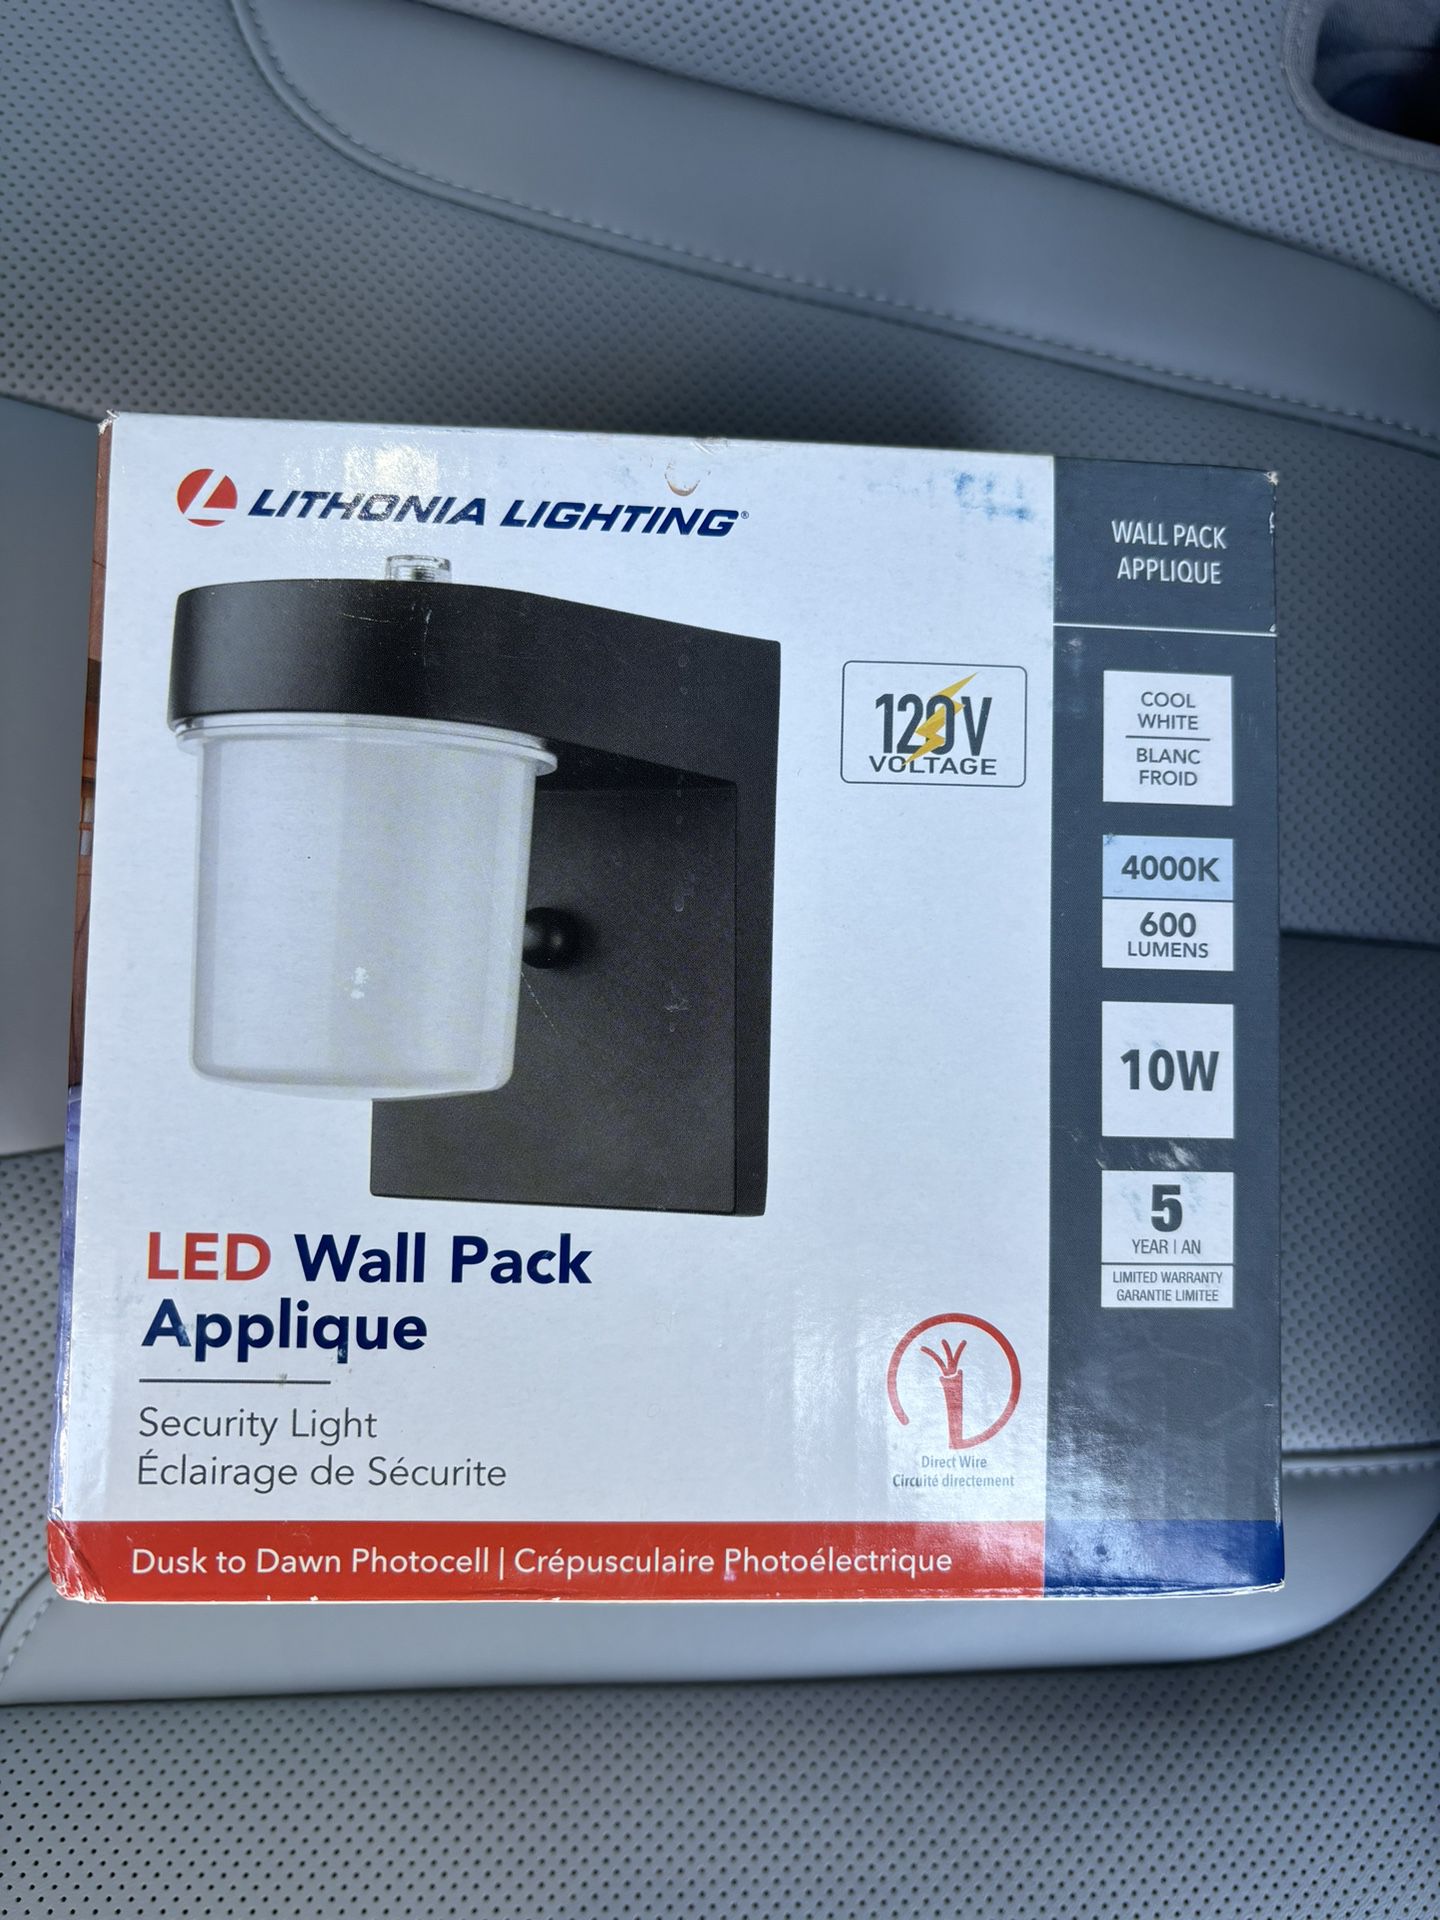 Lithonia Led Wall Pack ( New Never Used ) $20 OBO